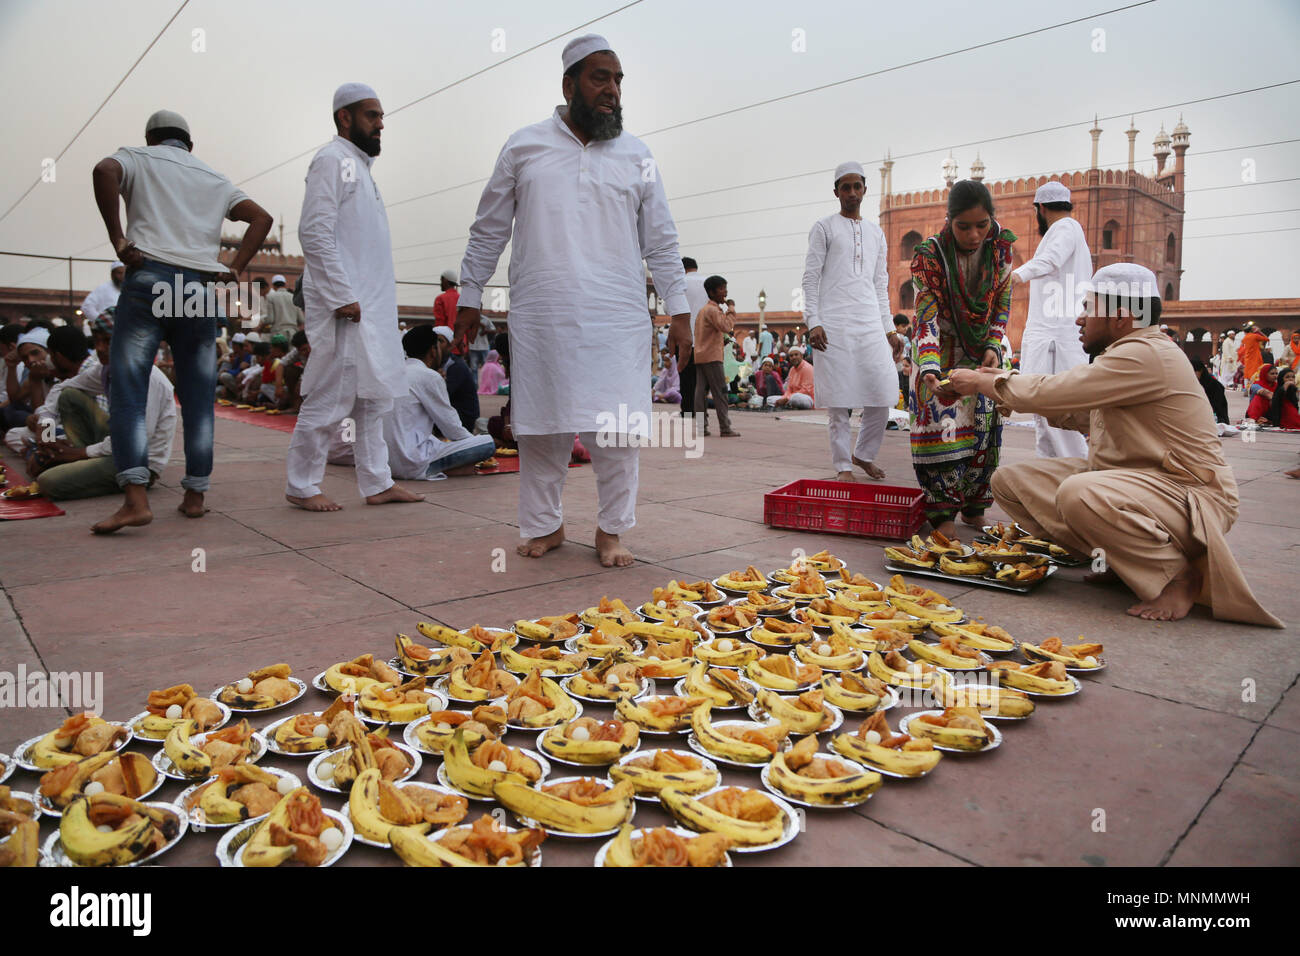 Srinagar, India. 18th May, 2018. An Indian Muslim (1st R) distributes fruit among people in the compound of Jama Masjid in New Delhi, India, May 18, 2018. Credit: Javed Dar/Xinhua/Alamy Live News Stock Photo